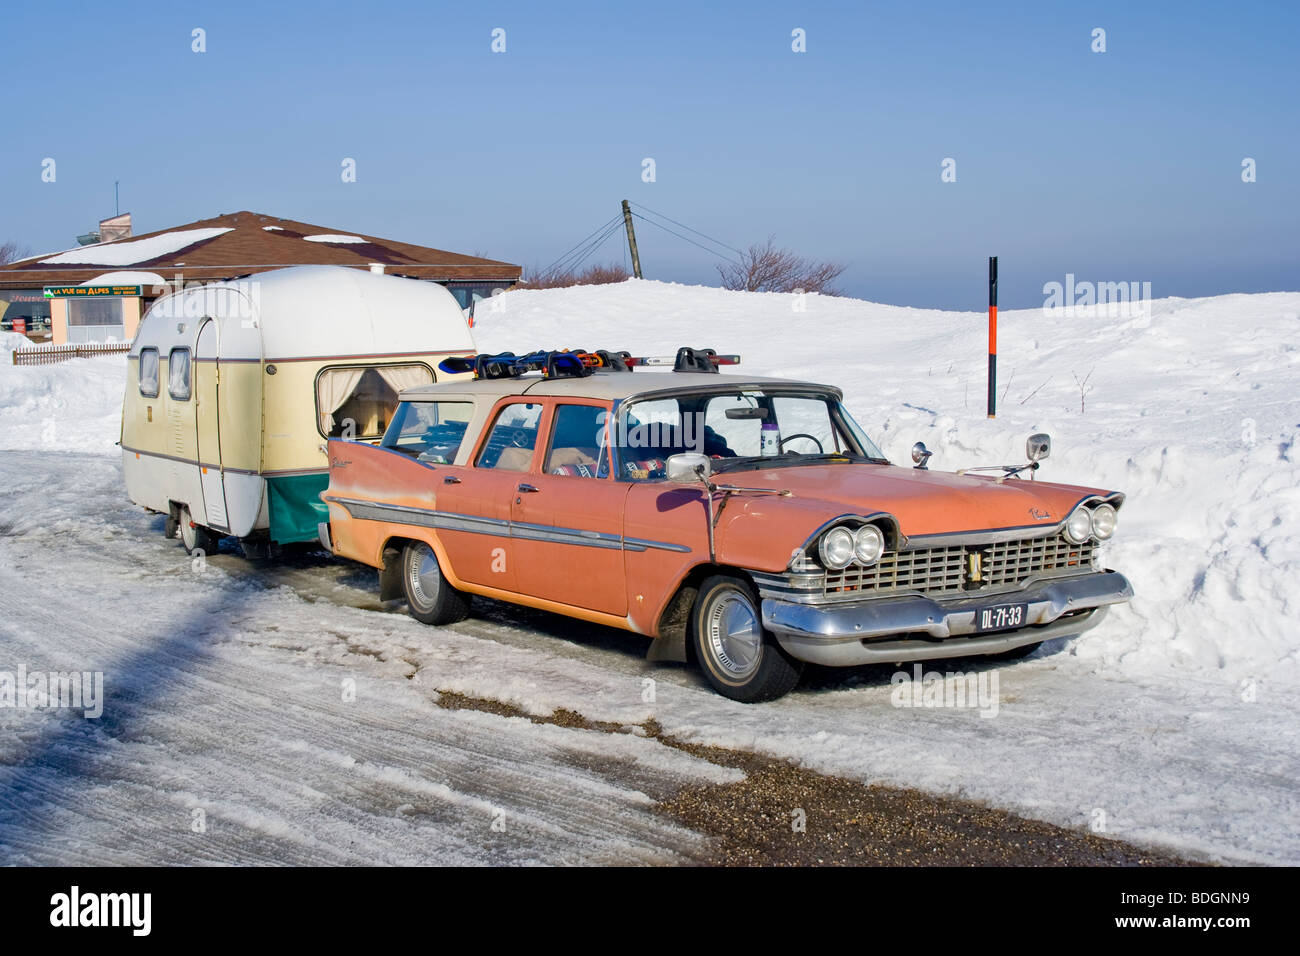 Vintage pink american car with small caravan on snowy landscape, Alsace France Stock Photo